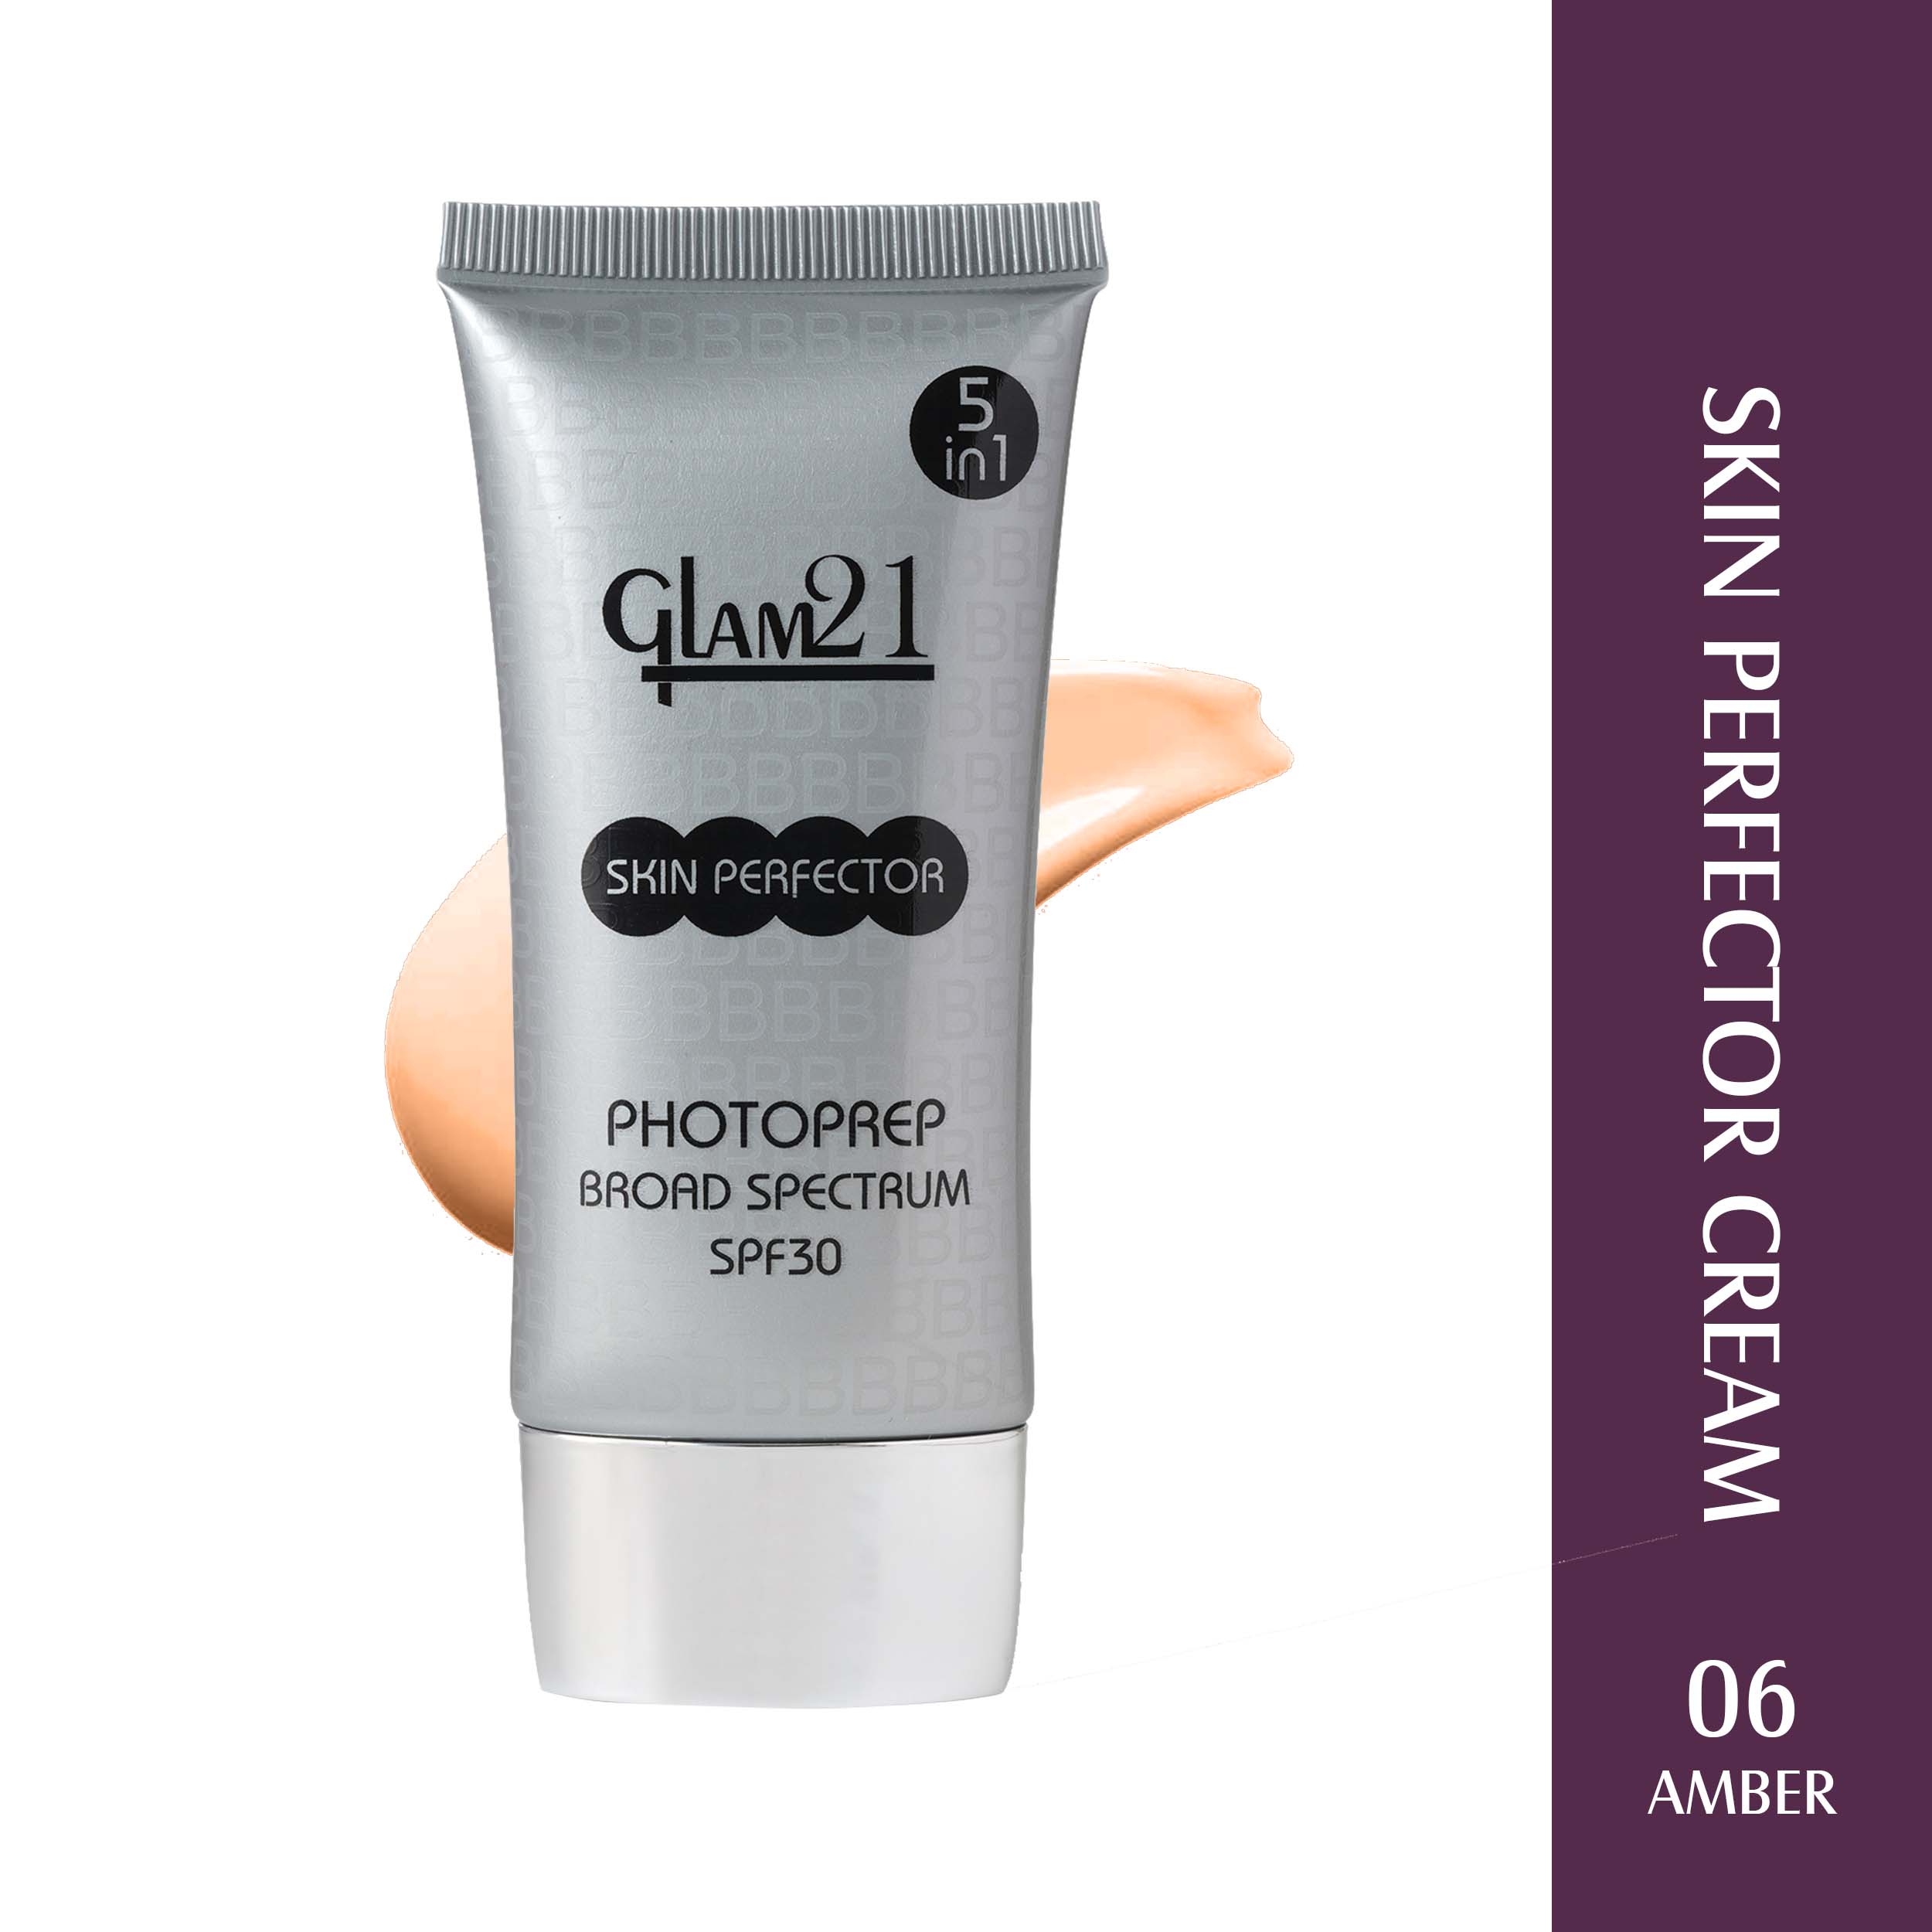 Glam21 Skin Perfector Cream with SPF30 UV Protection with Lightweight Satin Formulation Foundation, 50g (AMBER-06)